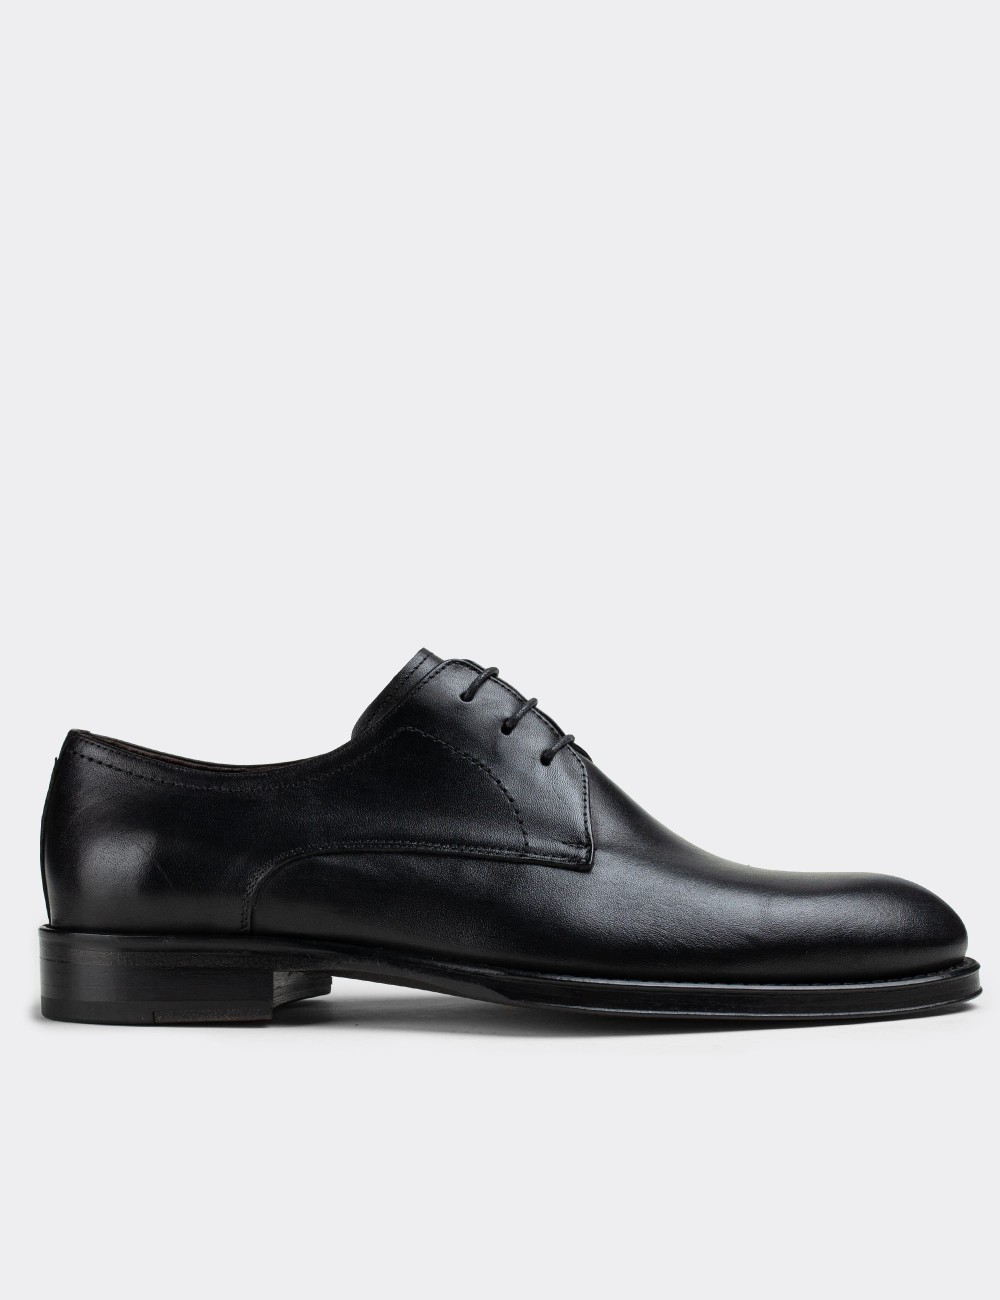 Black  Leather Classic Shoes - 01604MSYHK02